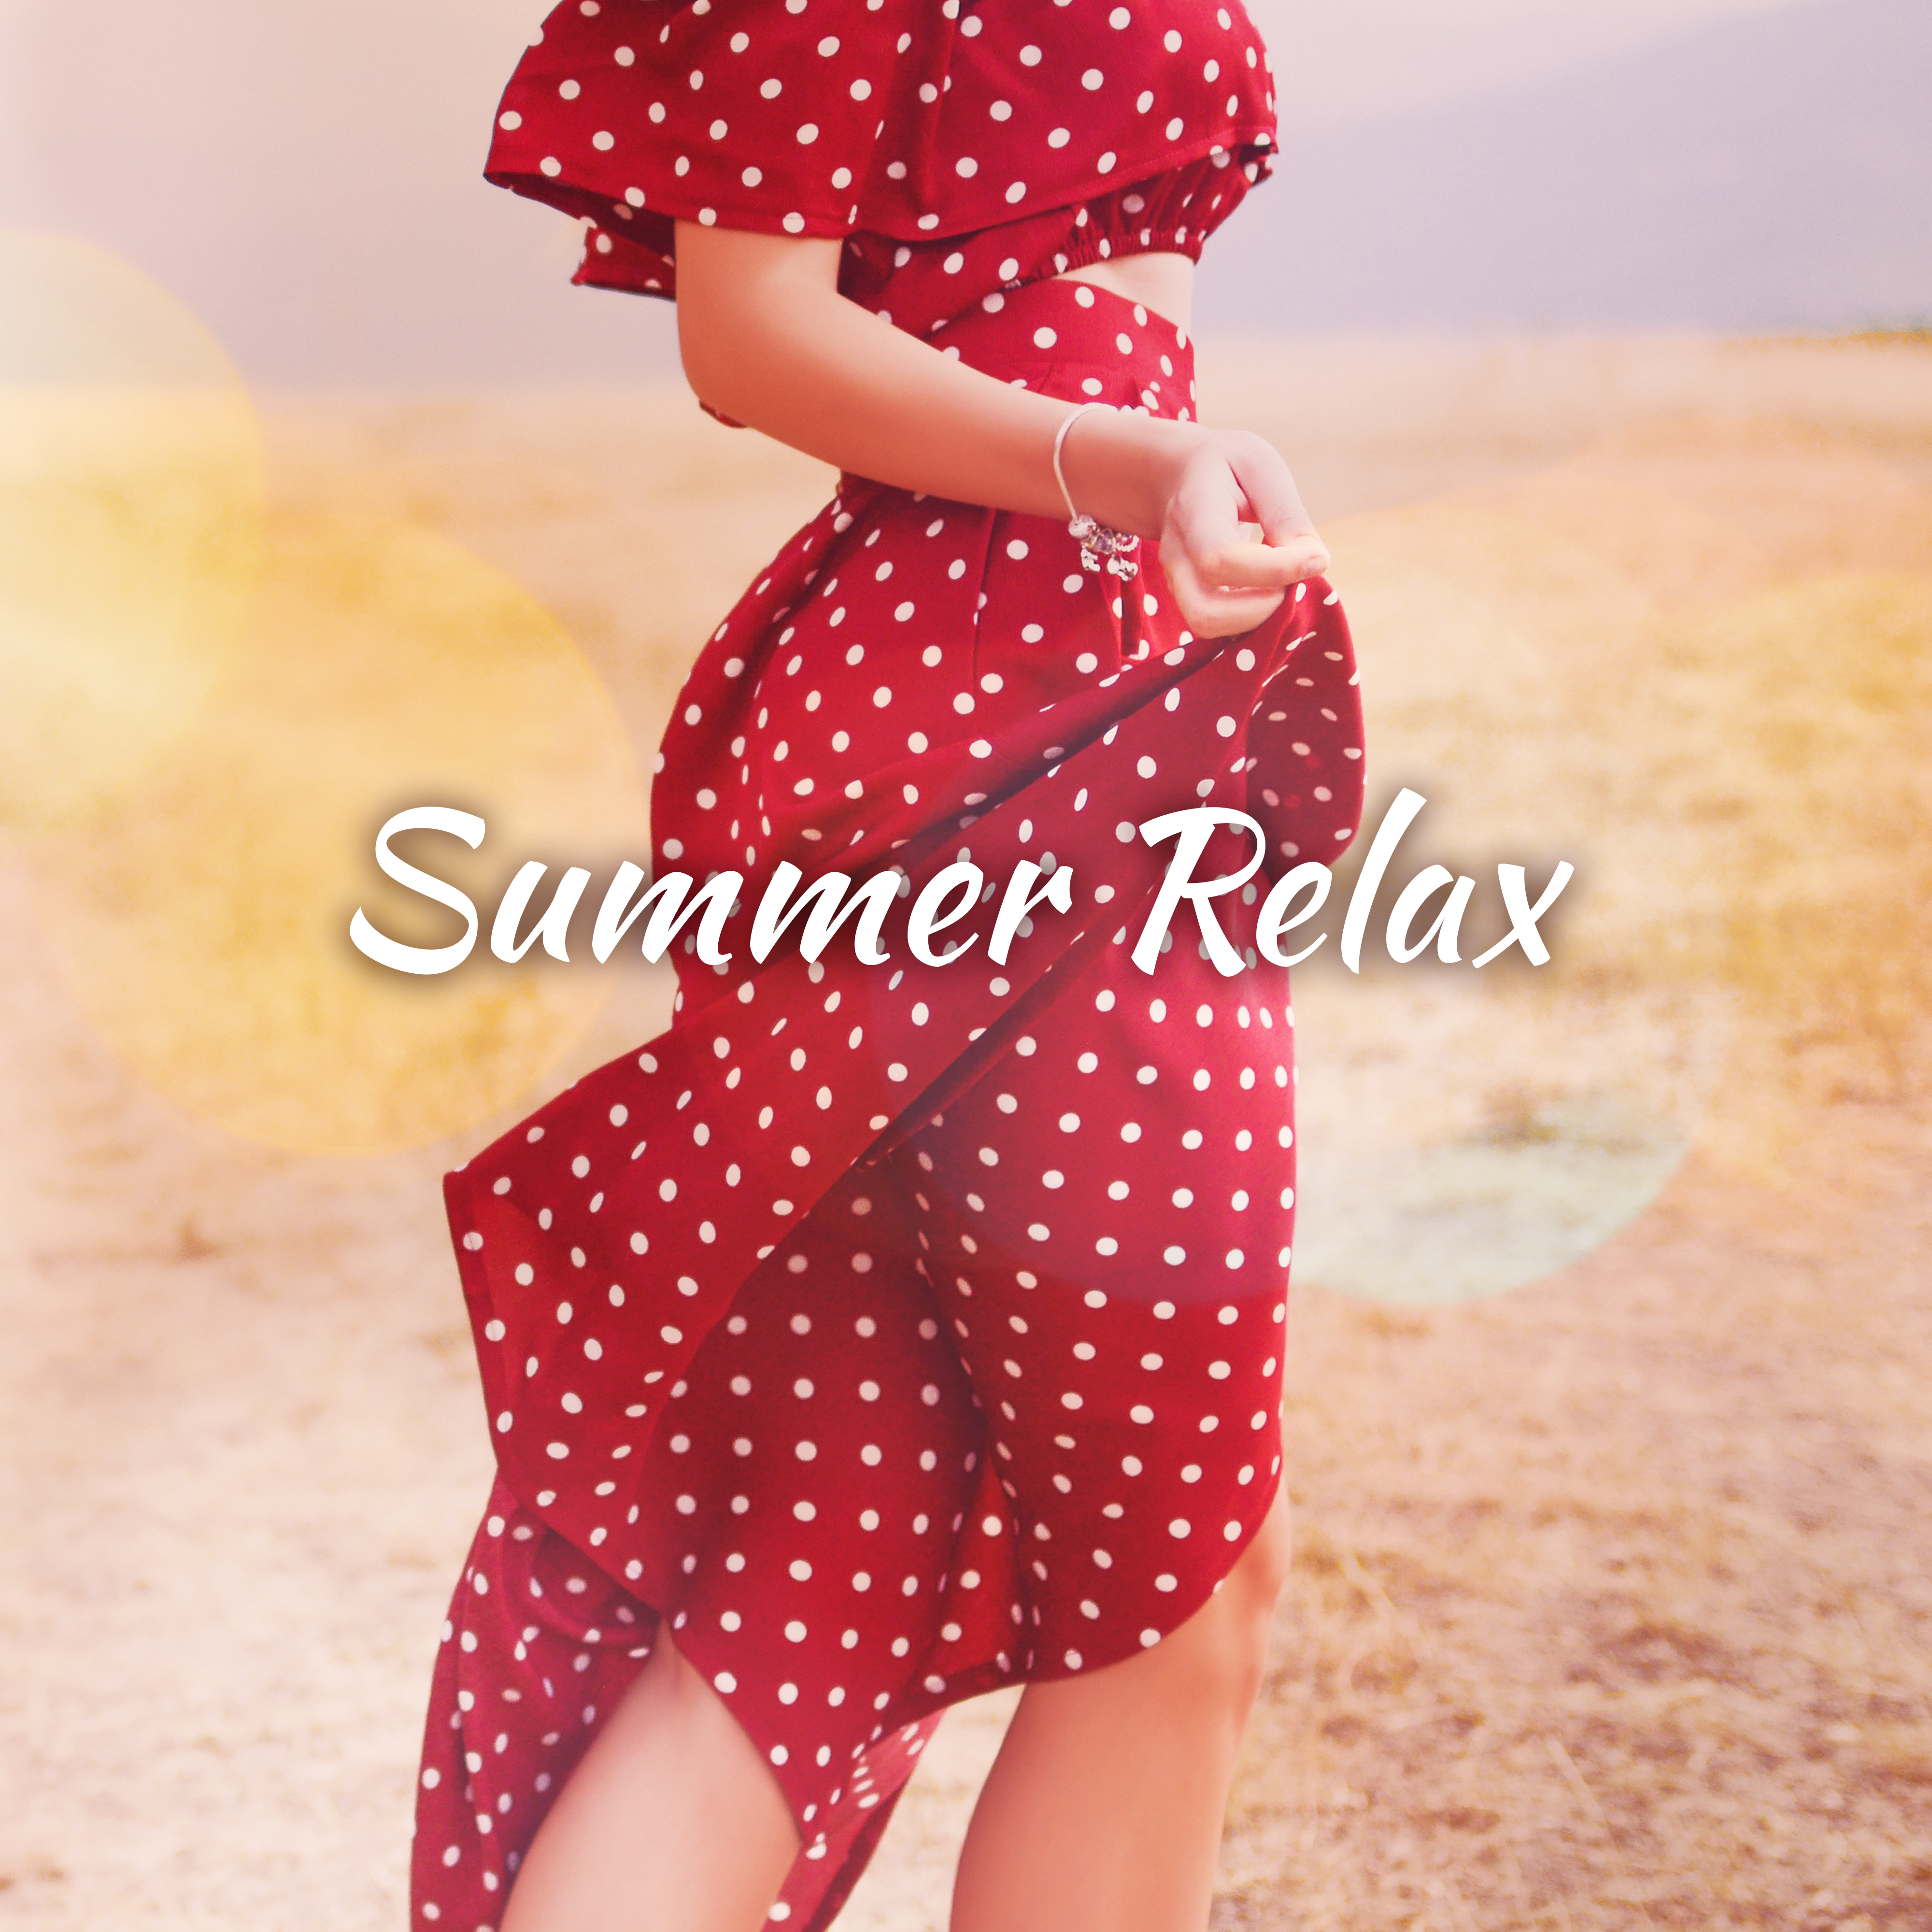 Summer Relax – Ibiza Chill Out, Beach Music, Peaceful Chill Out, Relaxing Energy, Ambient Summer